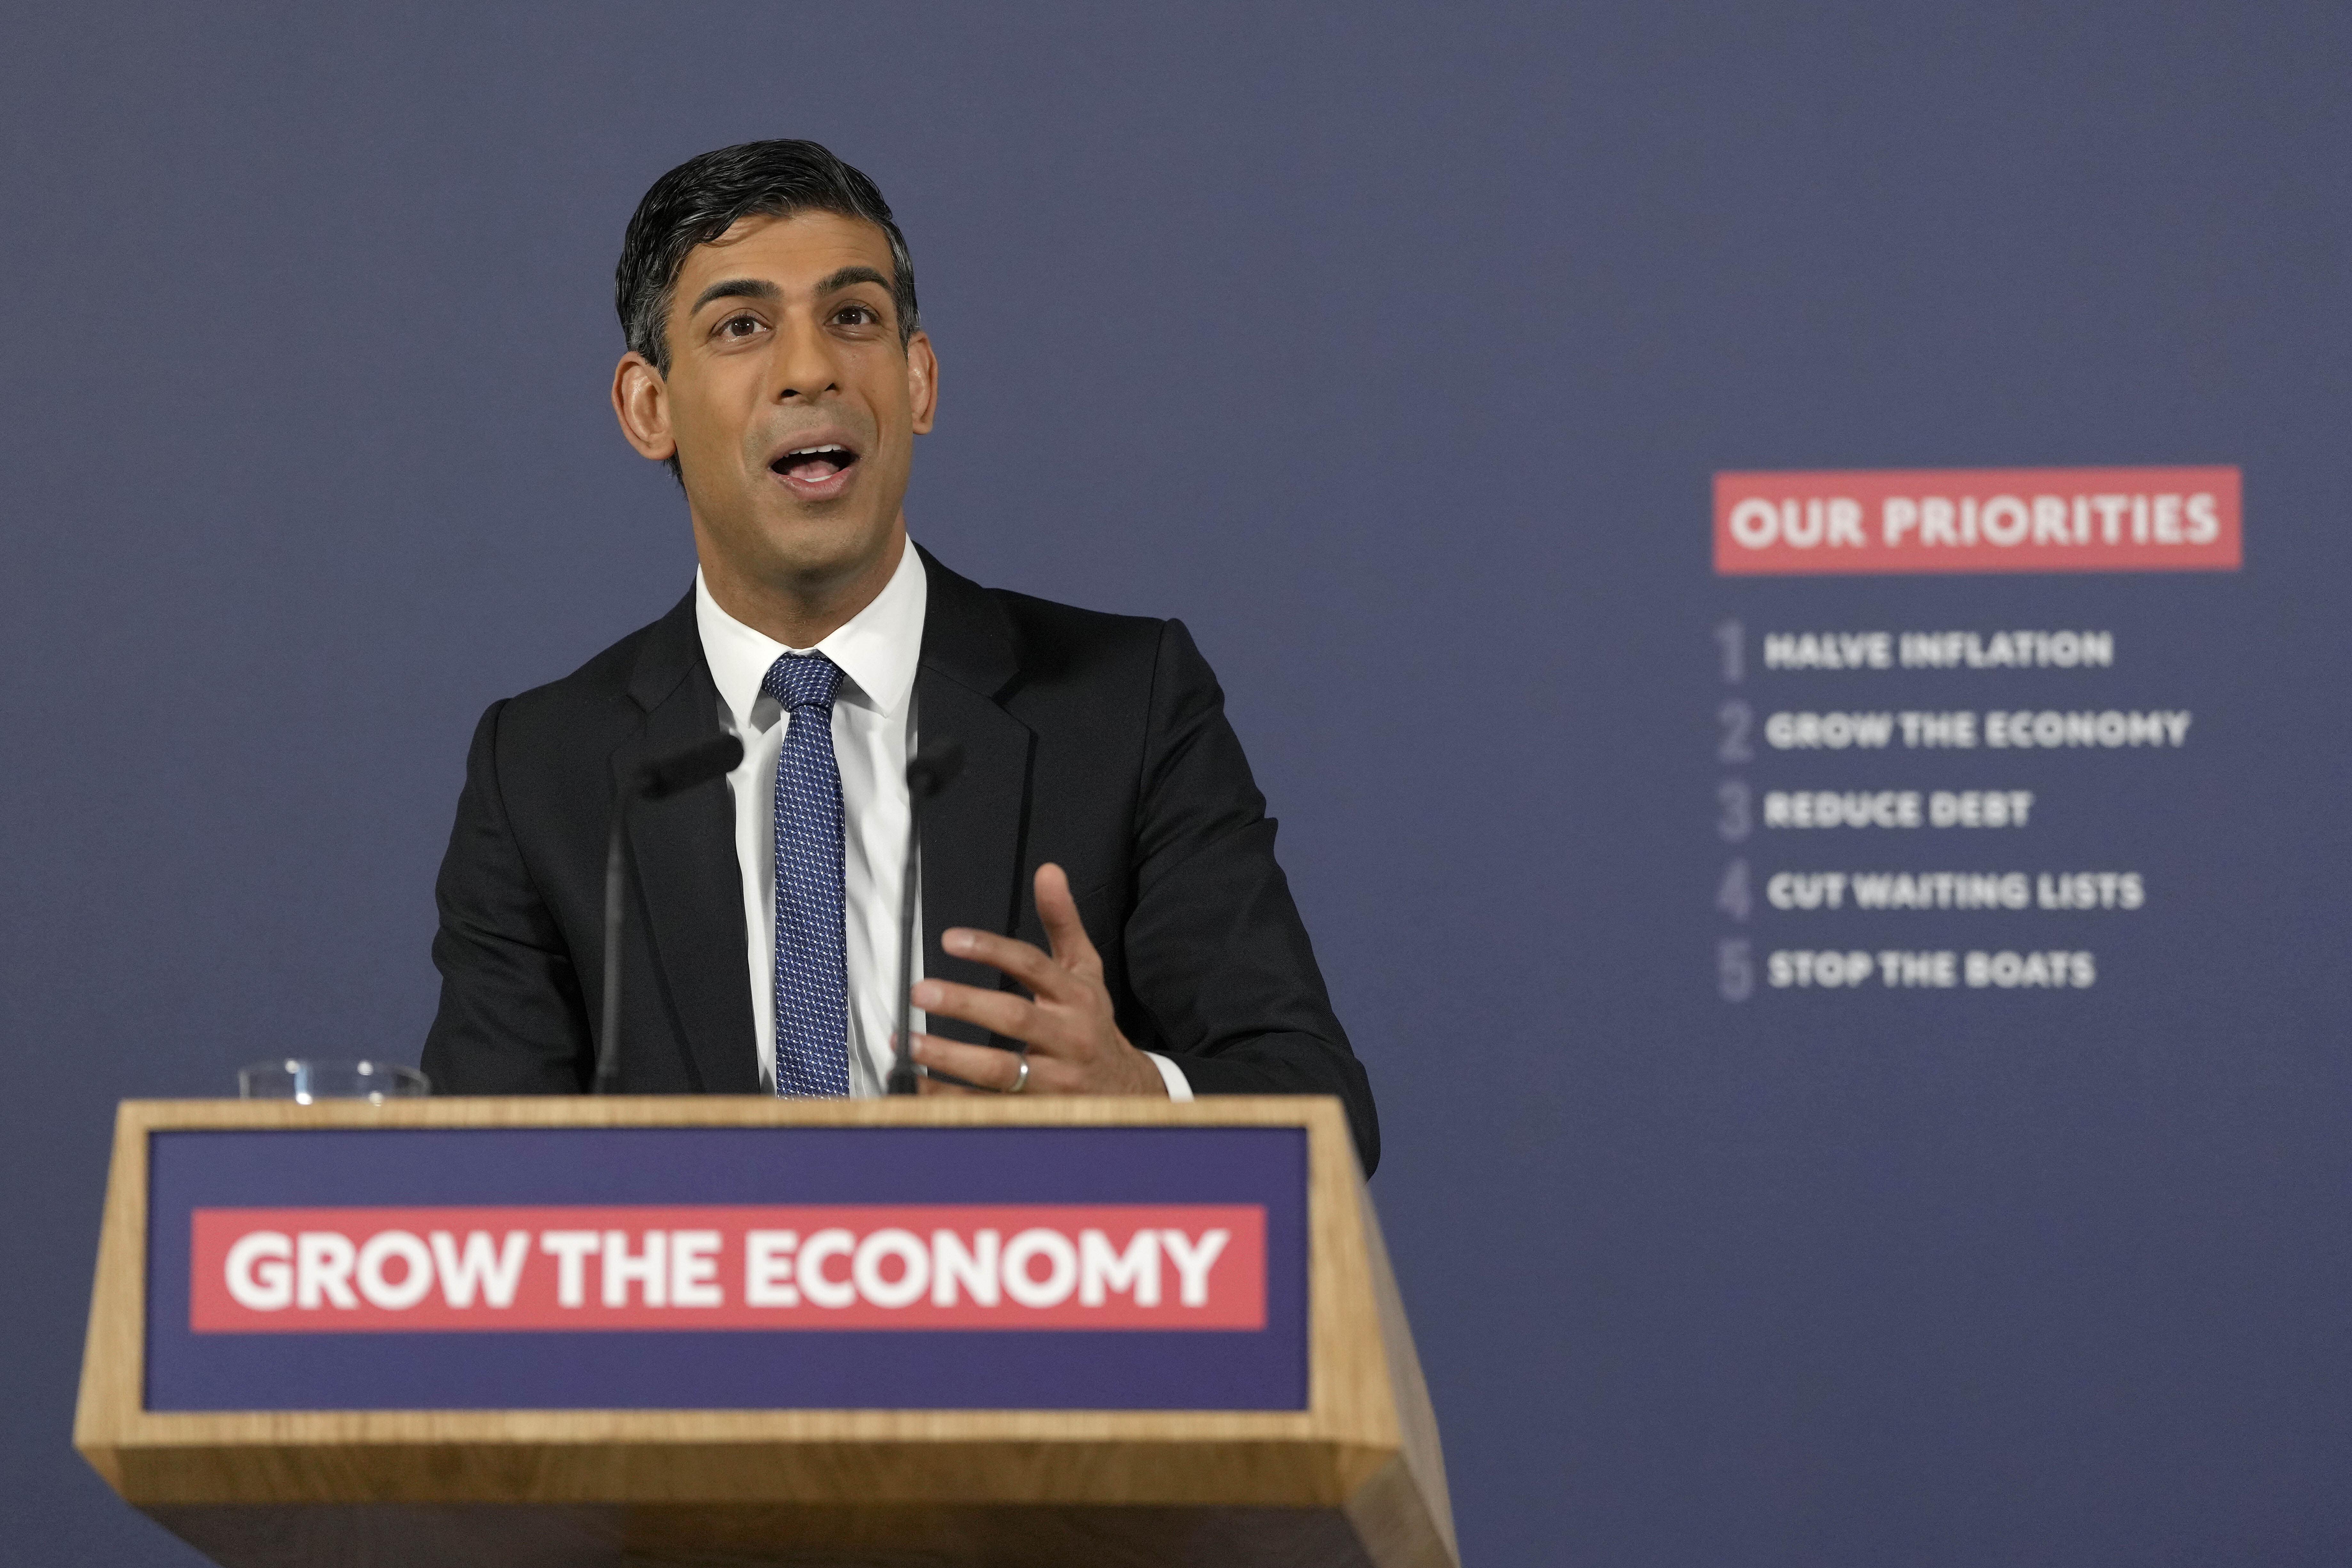 Prime Minister Rishi Sunak giving a speech at London Screen Academy (Kirsty Wigglesworth/PA)